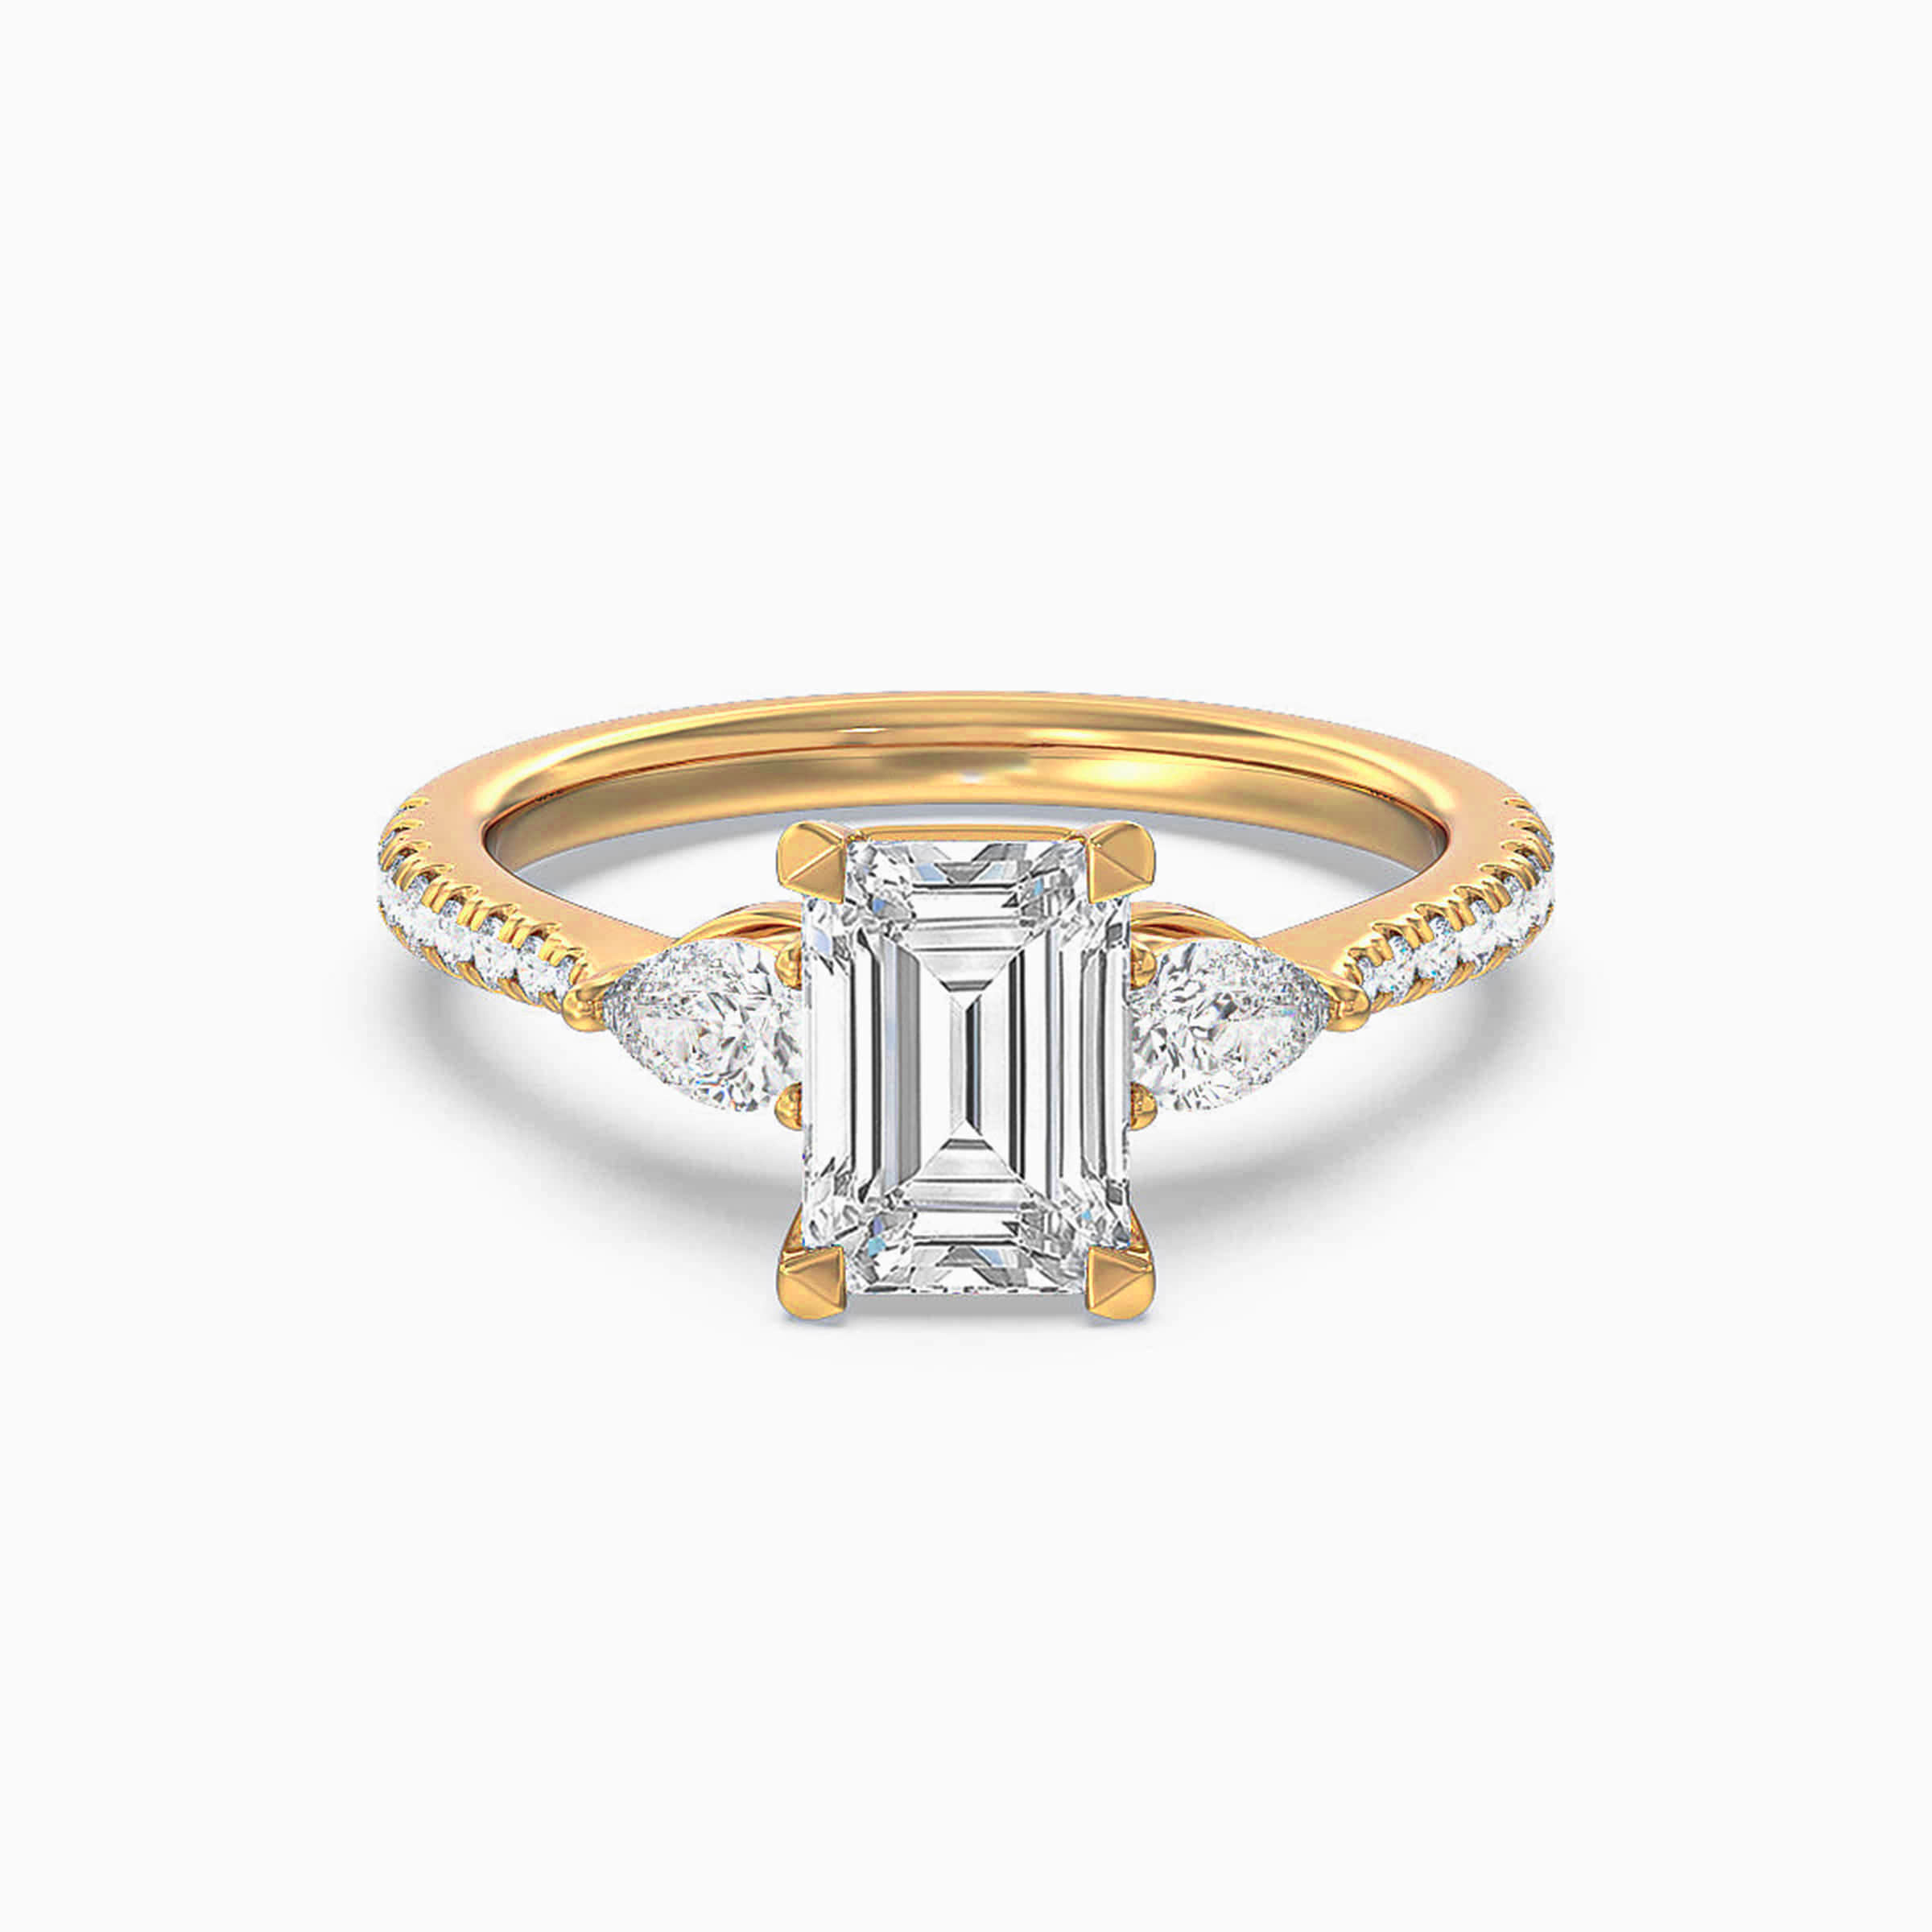 Darry Ring 3 stone emerald cut promise ring in yellow gold